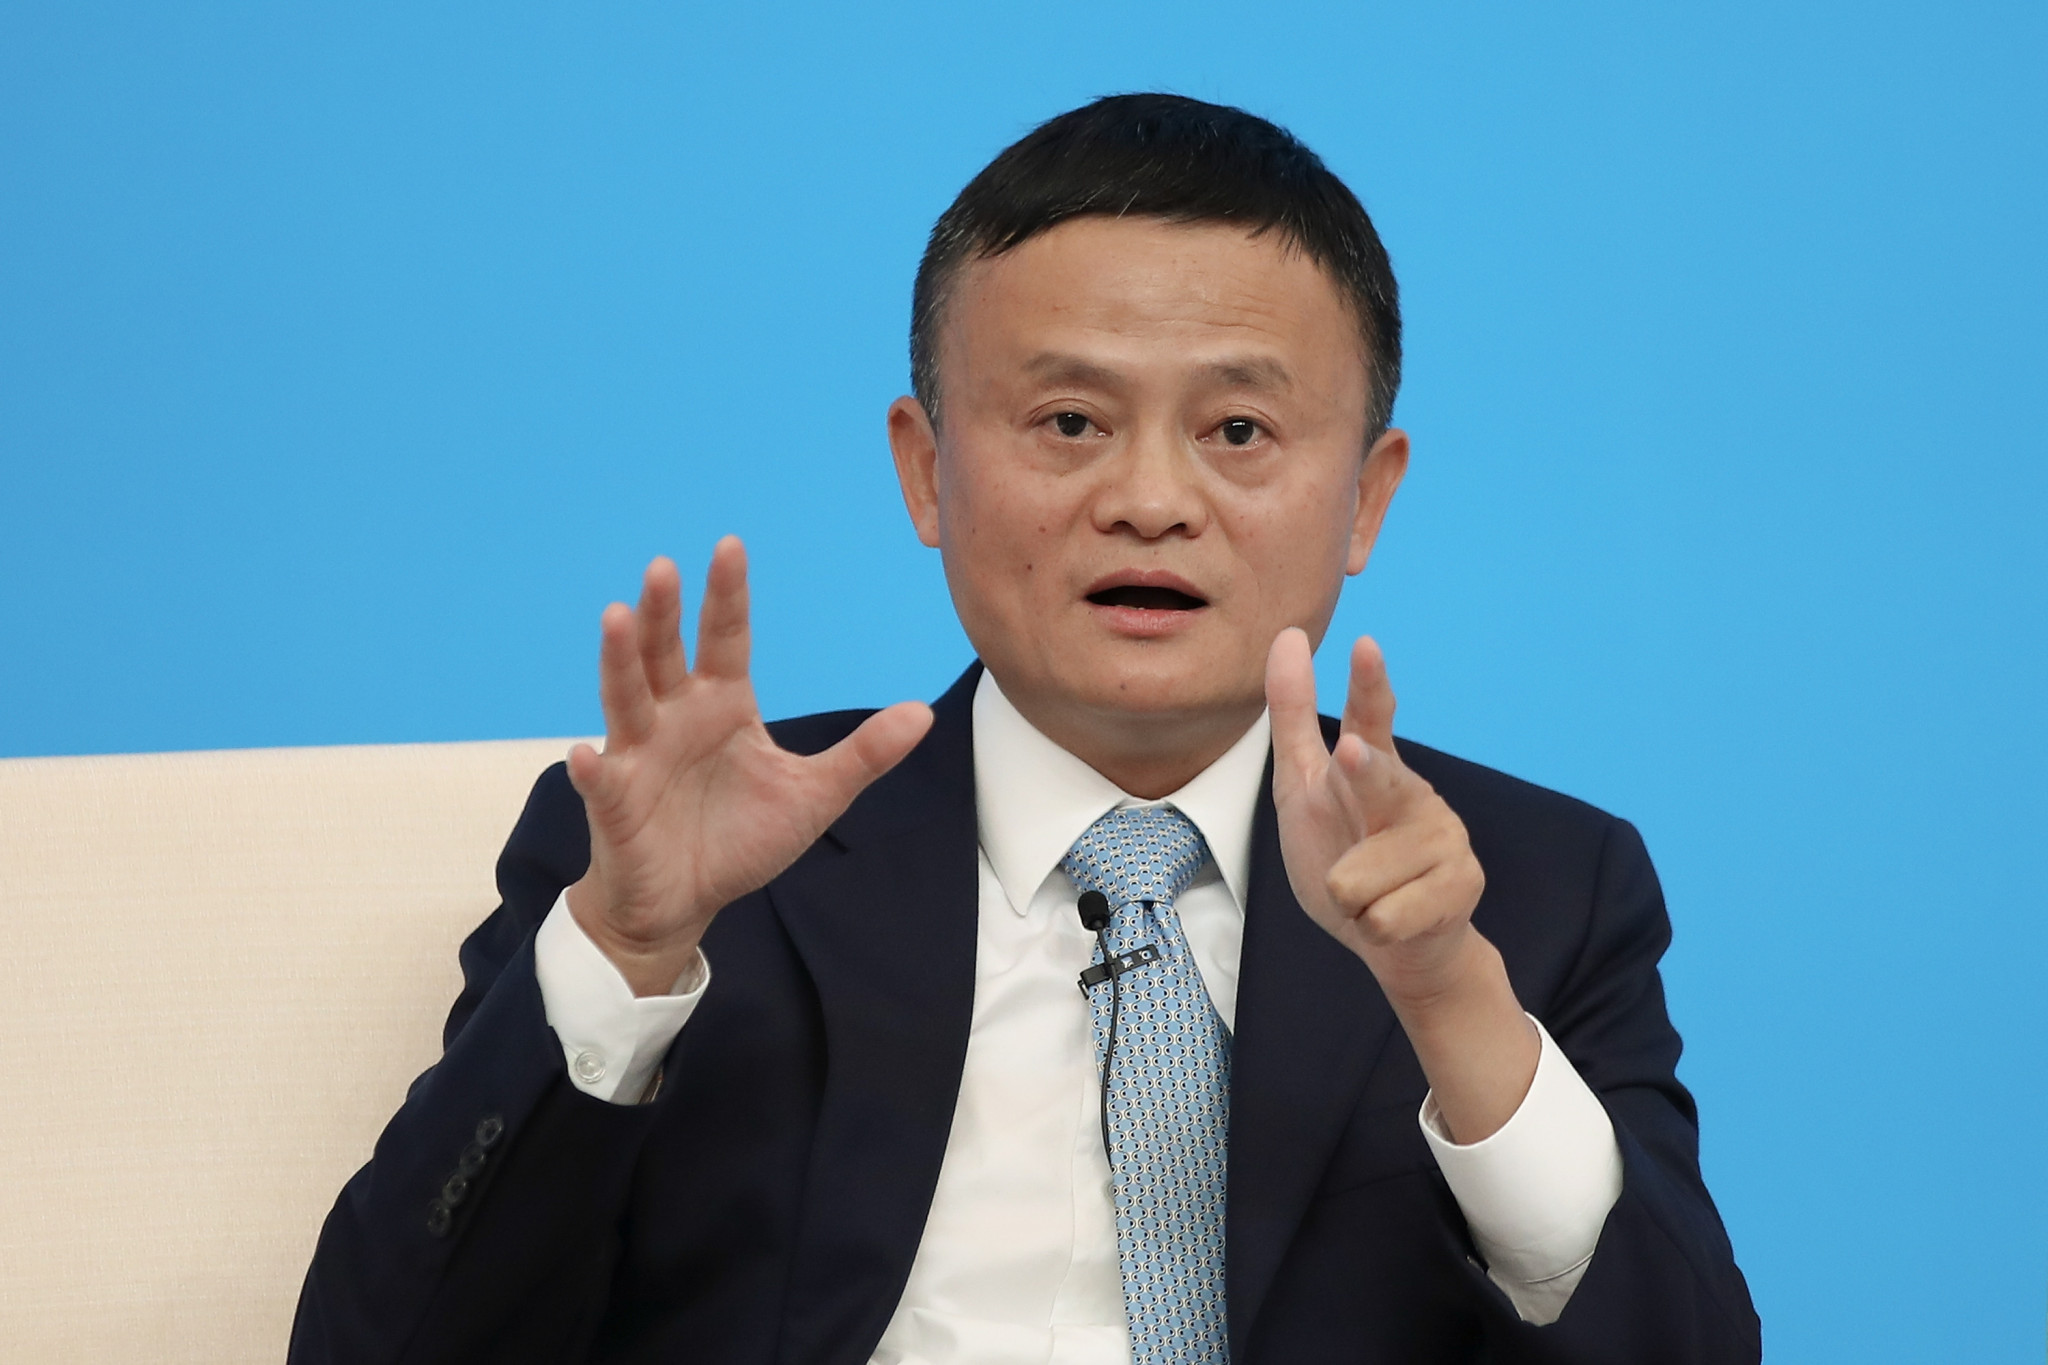 Jack Ma appears in new video in first public appearance for three months